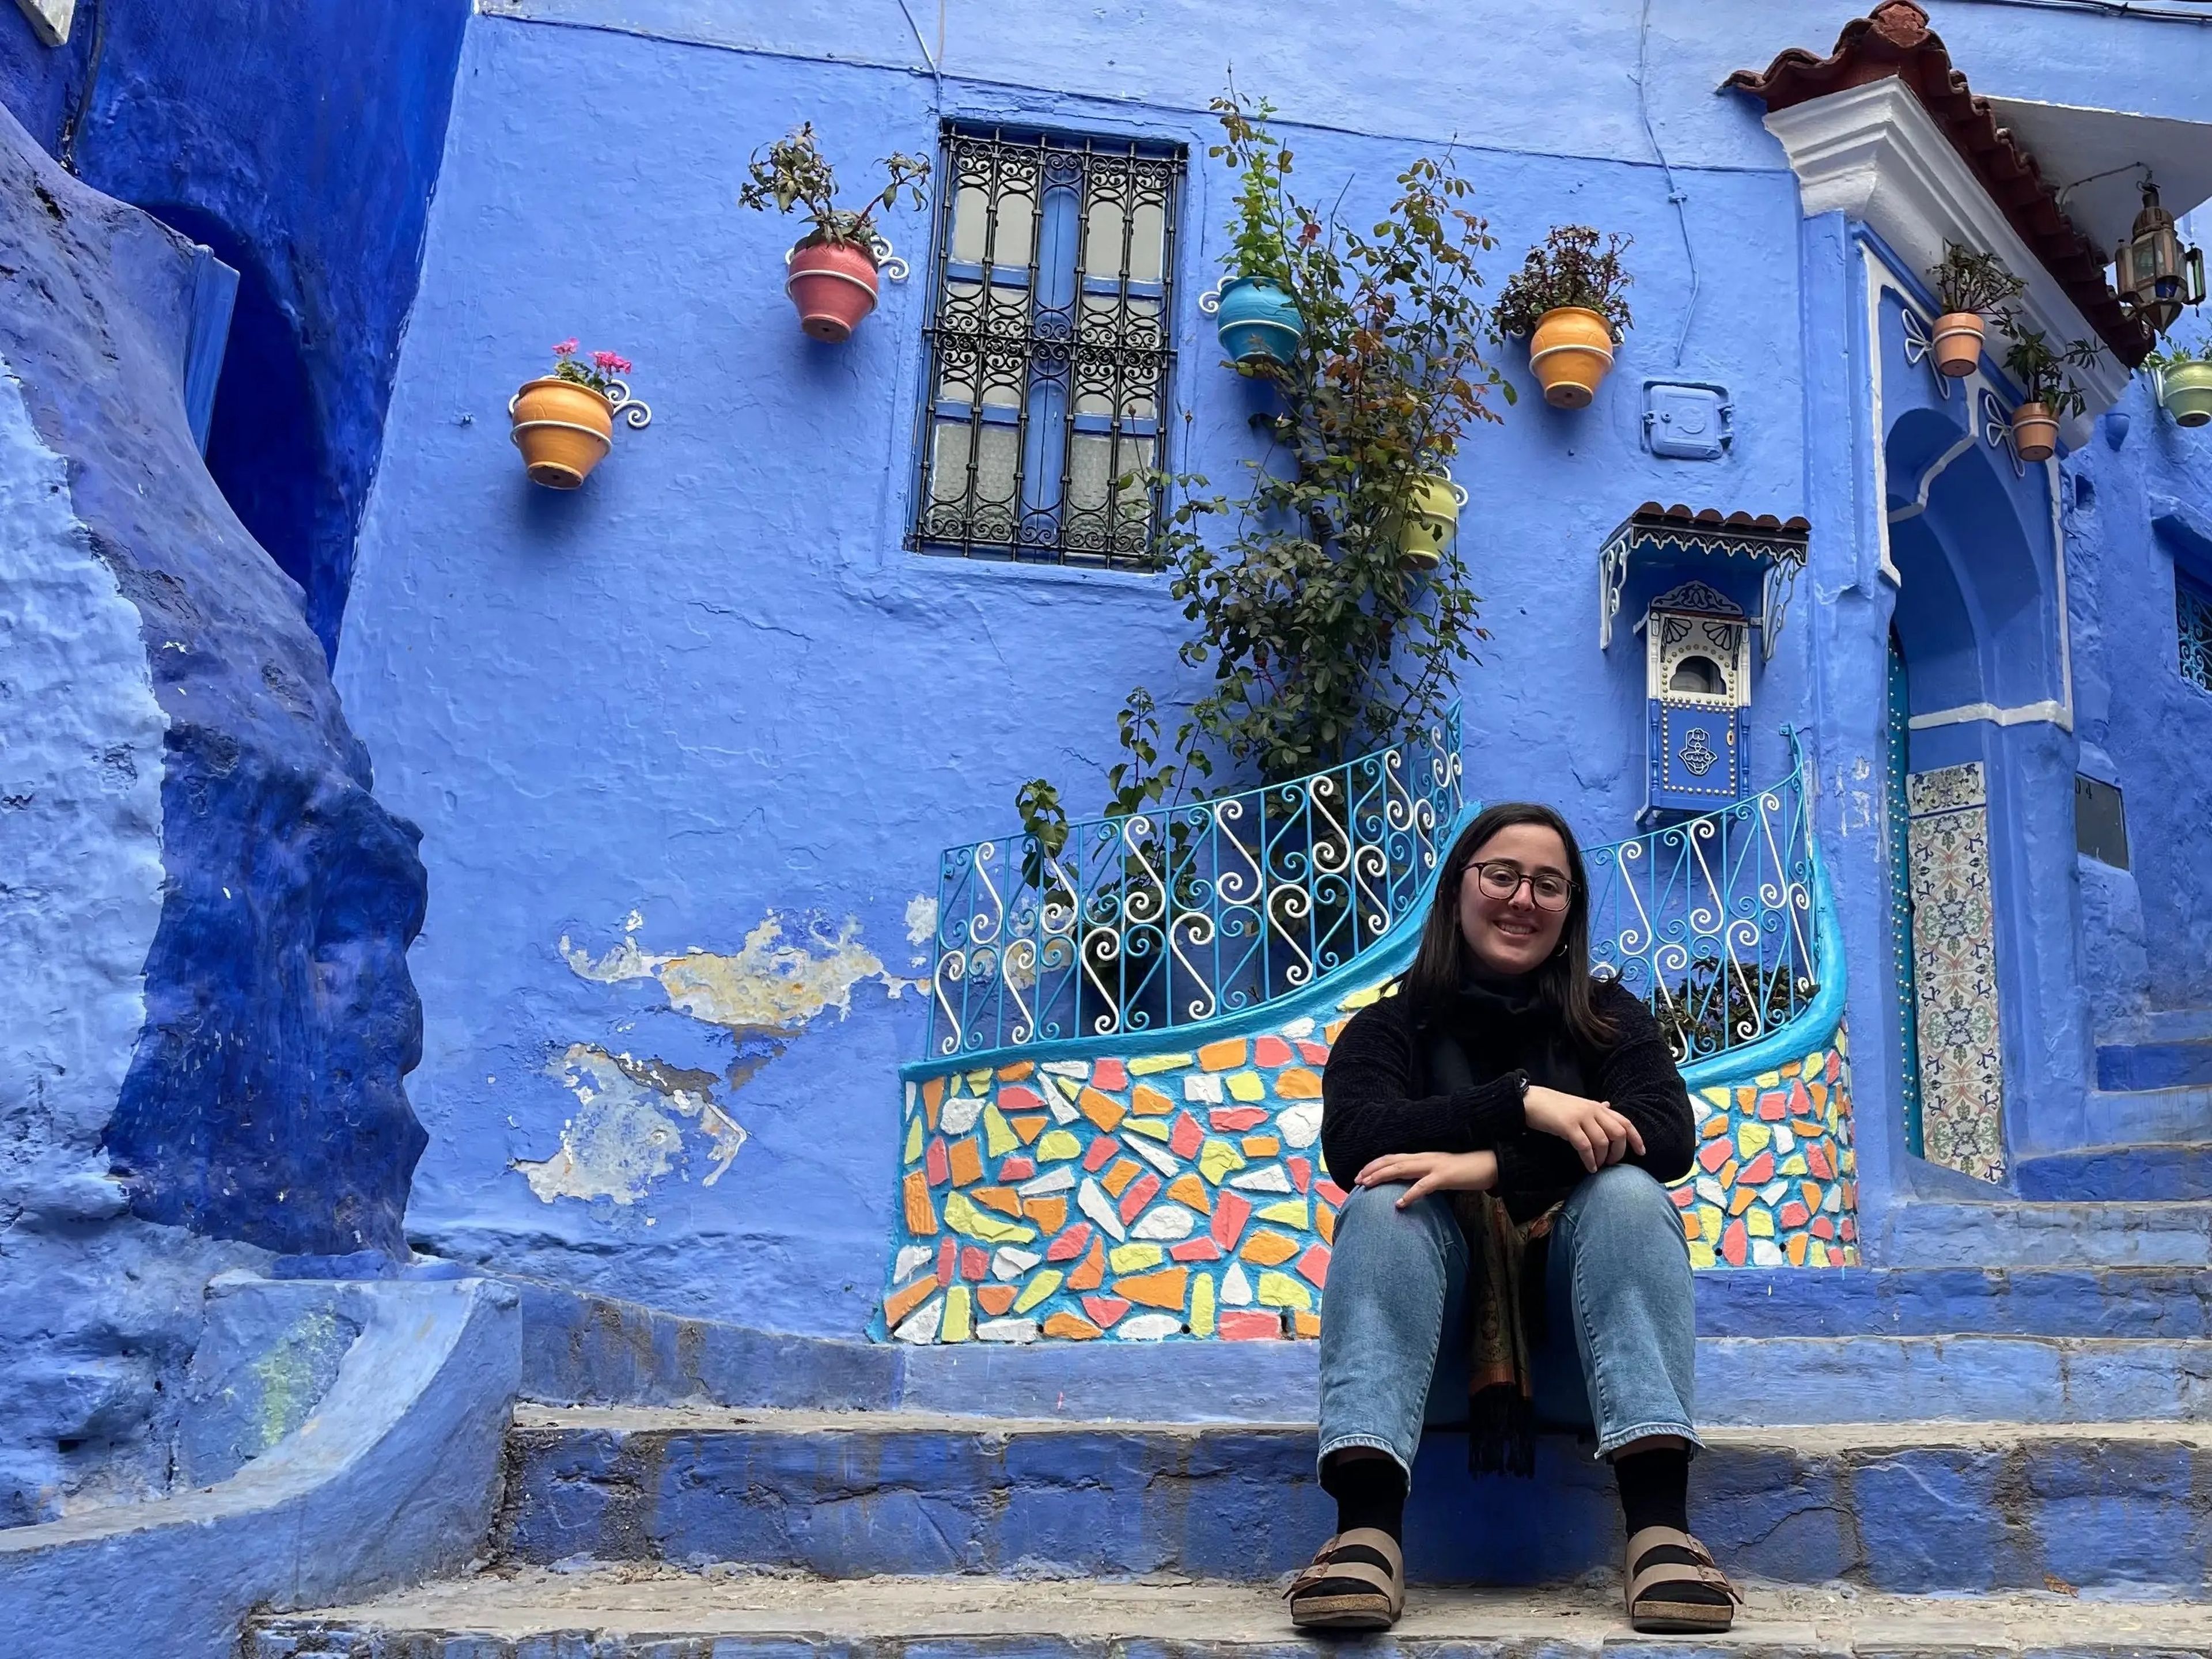 hannah sitting in front of a blue house in morocco